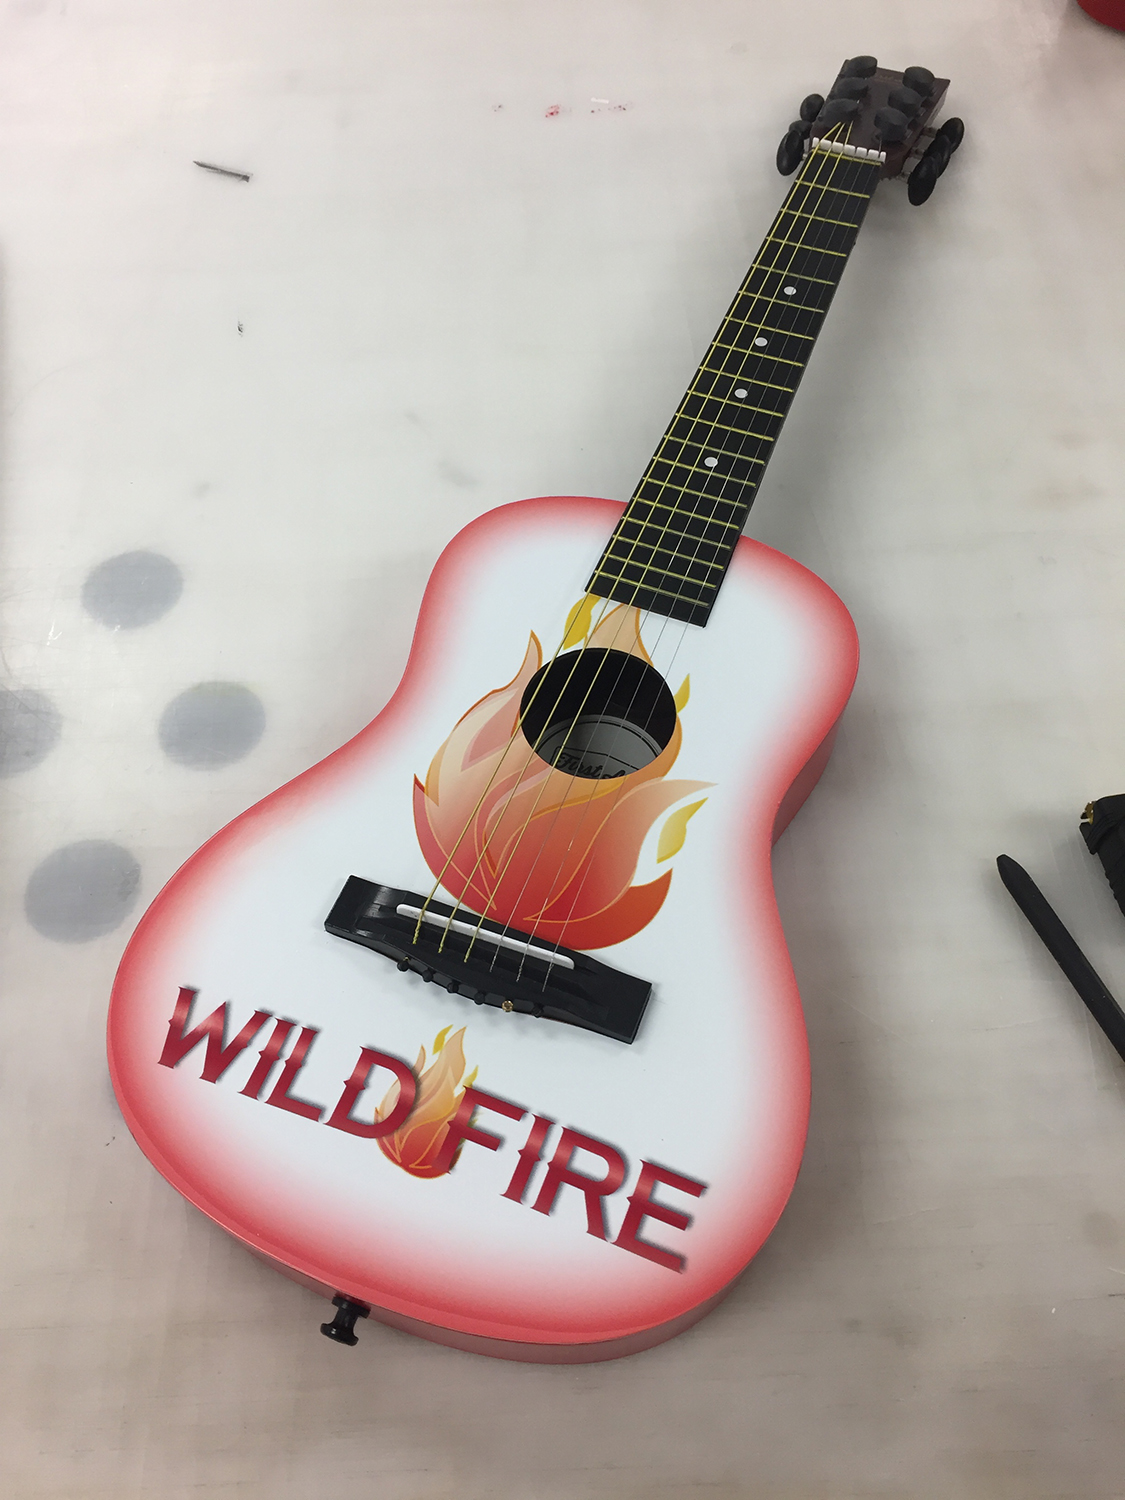 specialty-projects-guitar-wildfire